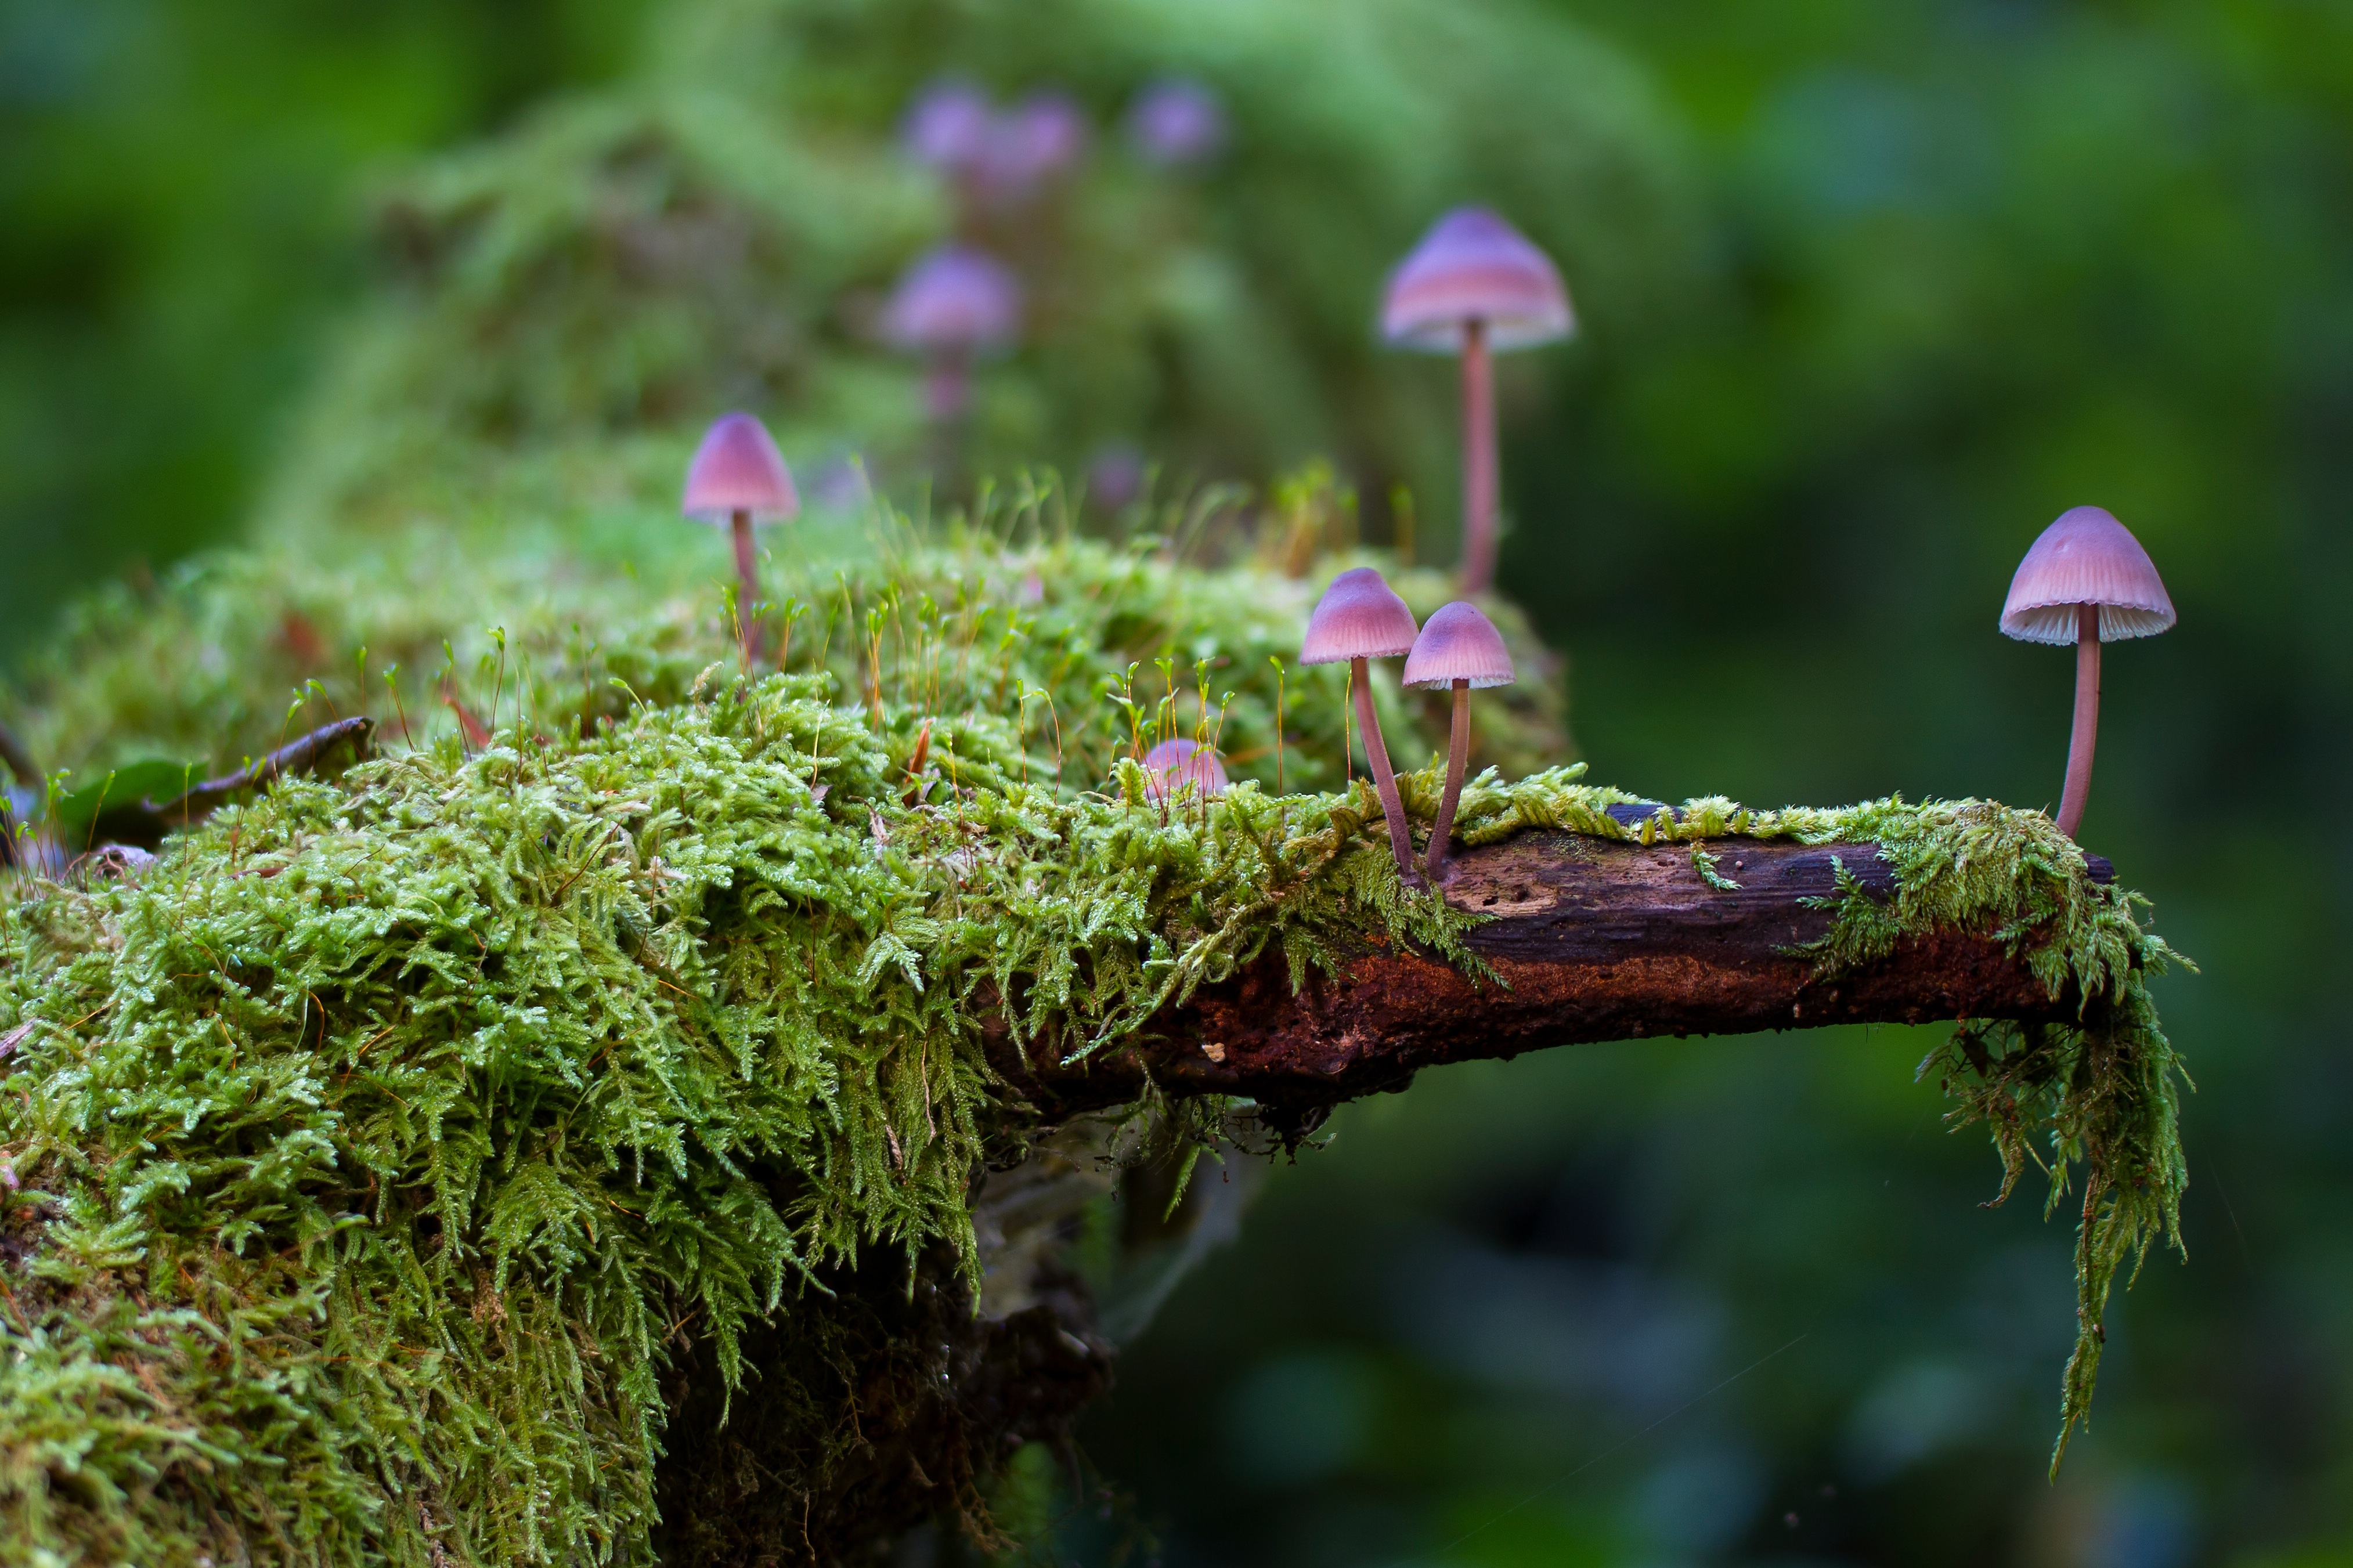 Tiny Mushrooms on a Log with Moss by adege